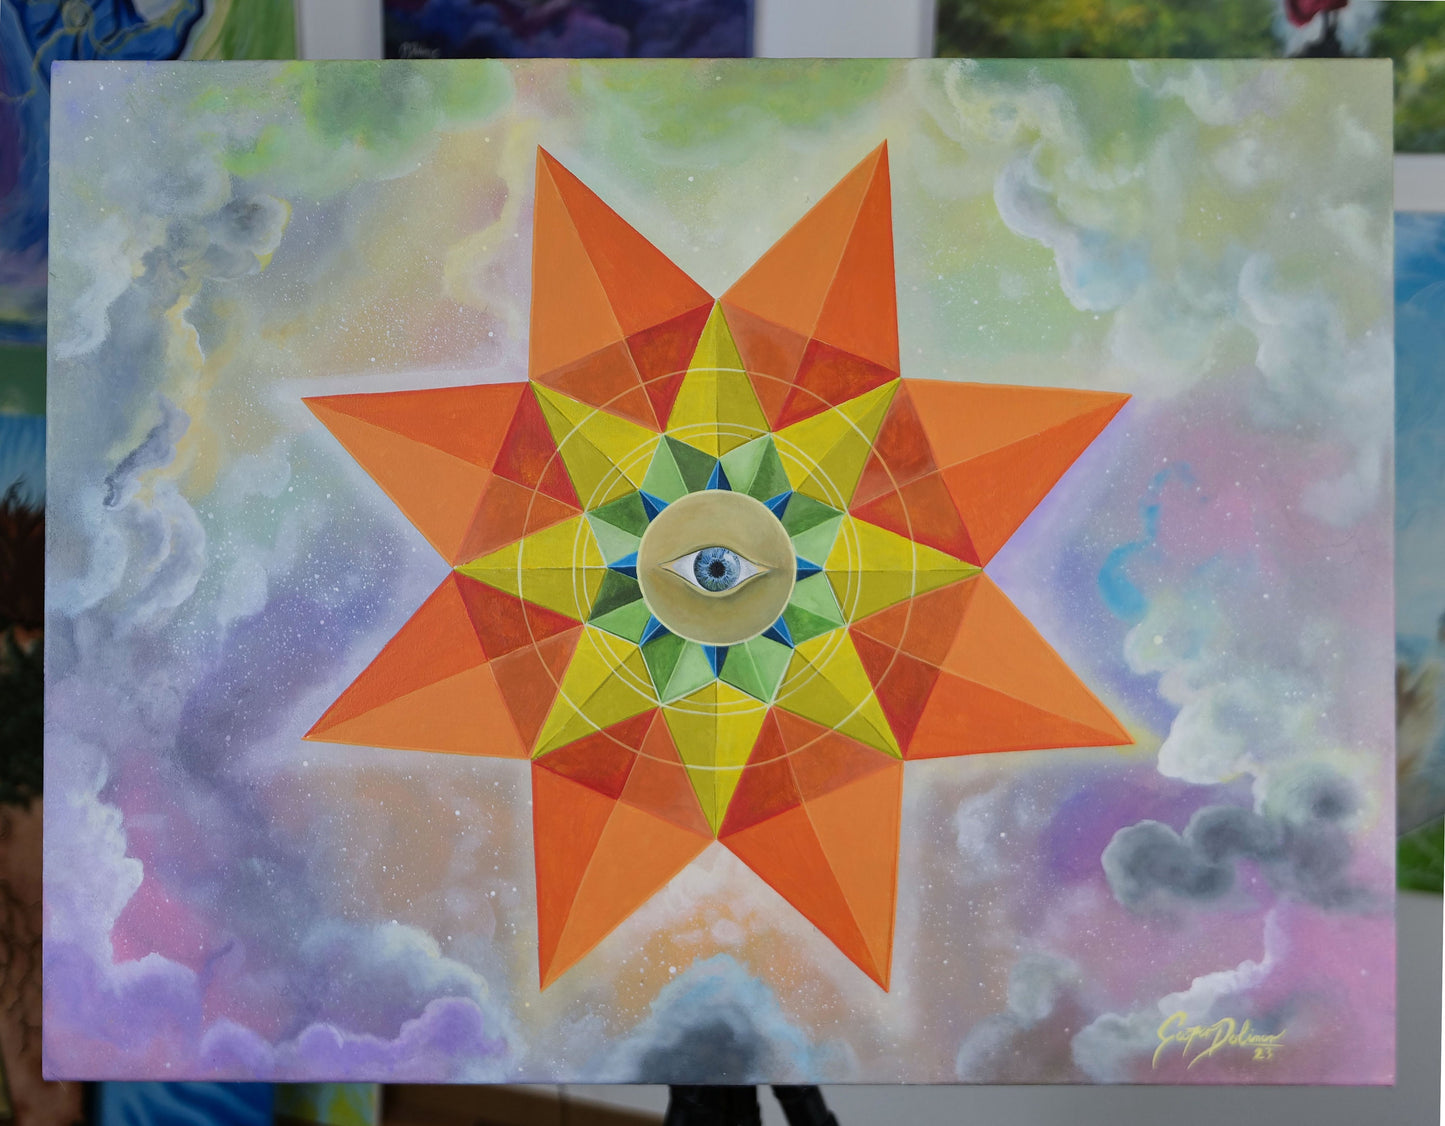 The Source | Intuitive & Energetic Original Painting